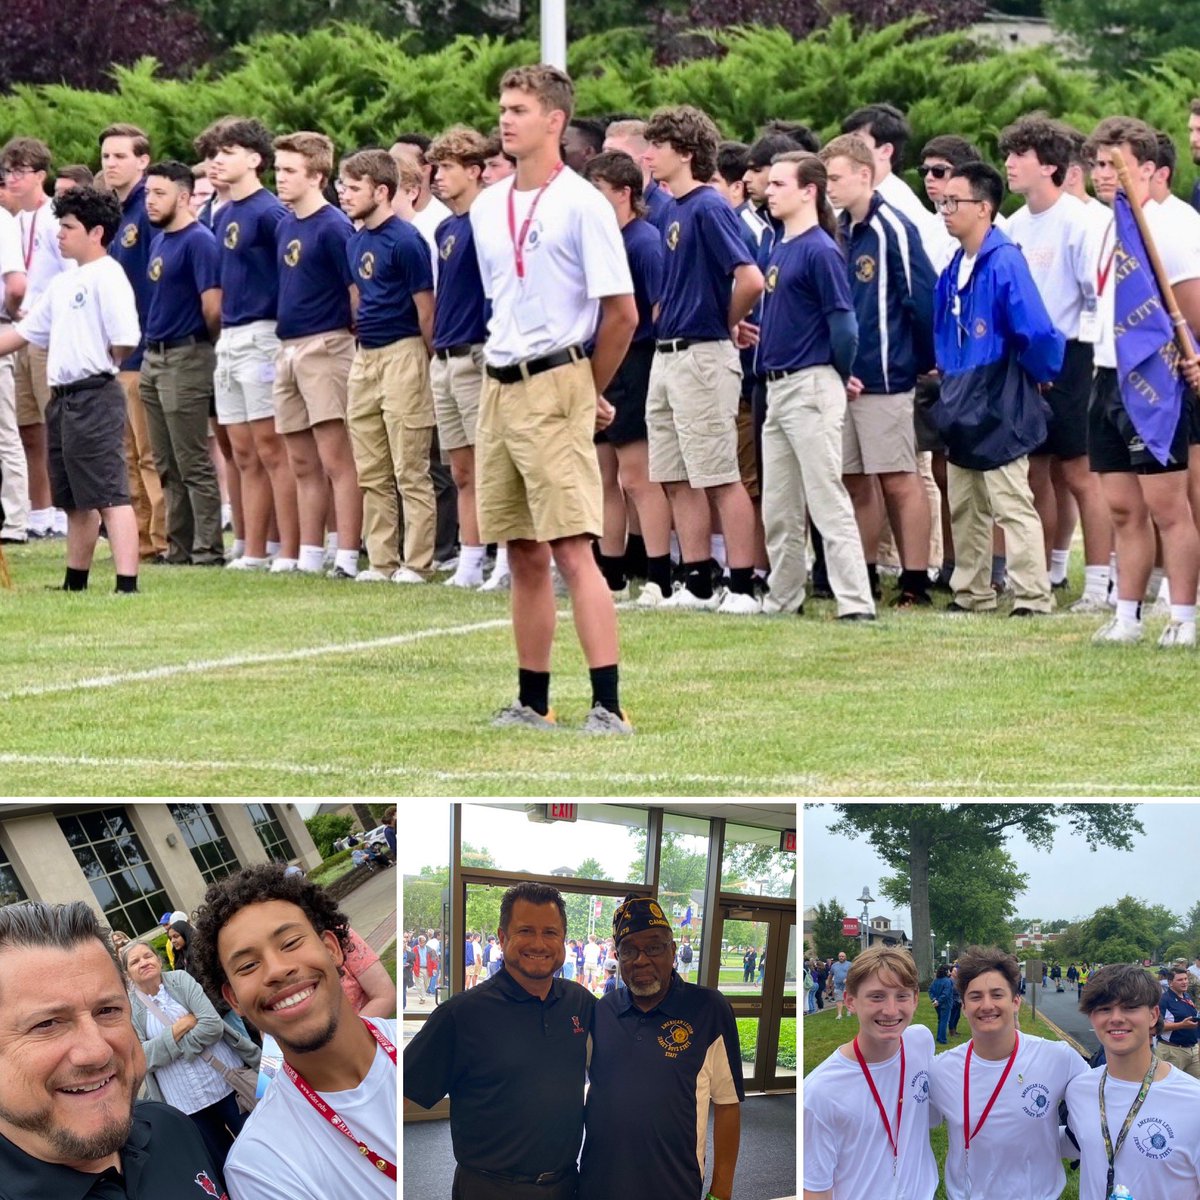 Great work to our young men who attended @ALJBS @RiderUniversity! 🇺🇸 Proud of you Ryan, Joel, Nick, Ty, Andrew, Michael, Om, David, Troy, Jacob, and Sean! #RVPride #BoysState 

I even got to see RV’s own, Mr. Lee!